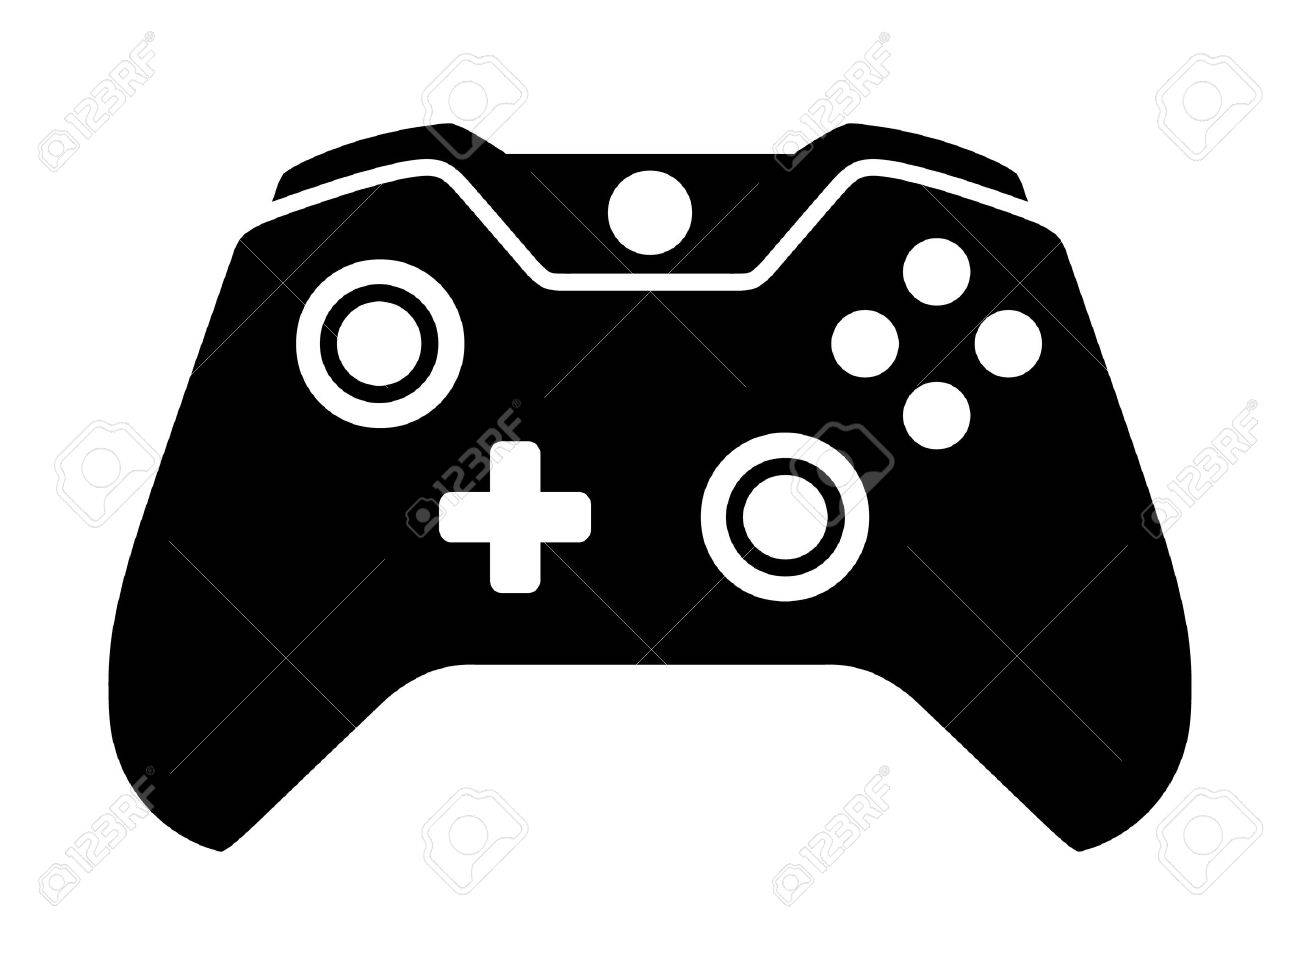 Video game controller or gamepad flat icon for apps and websites.